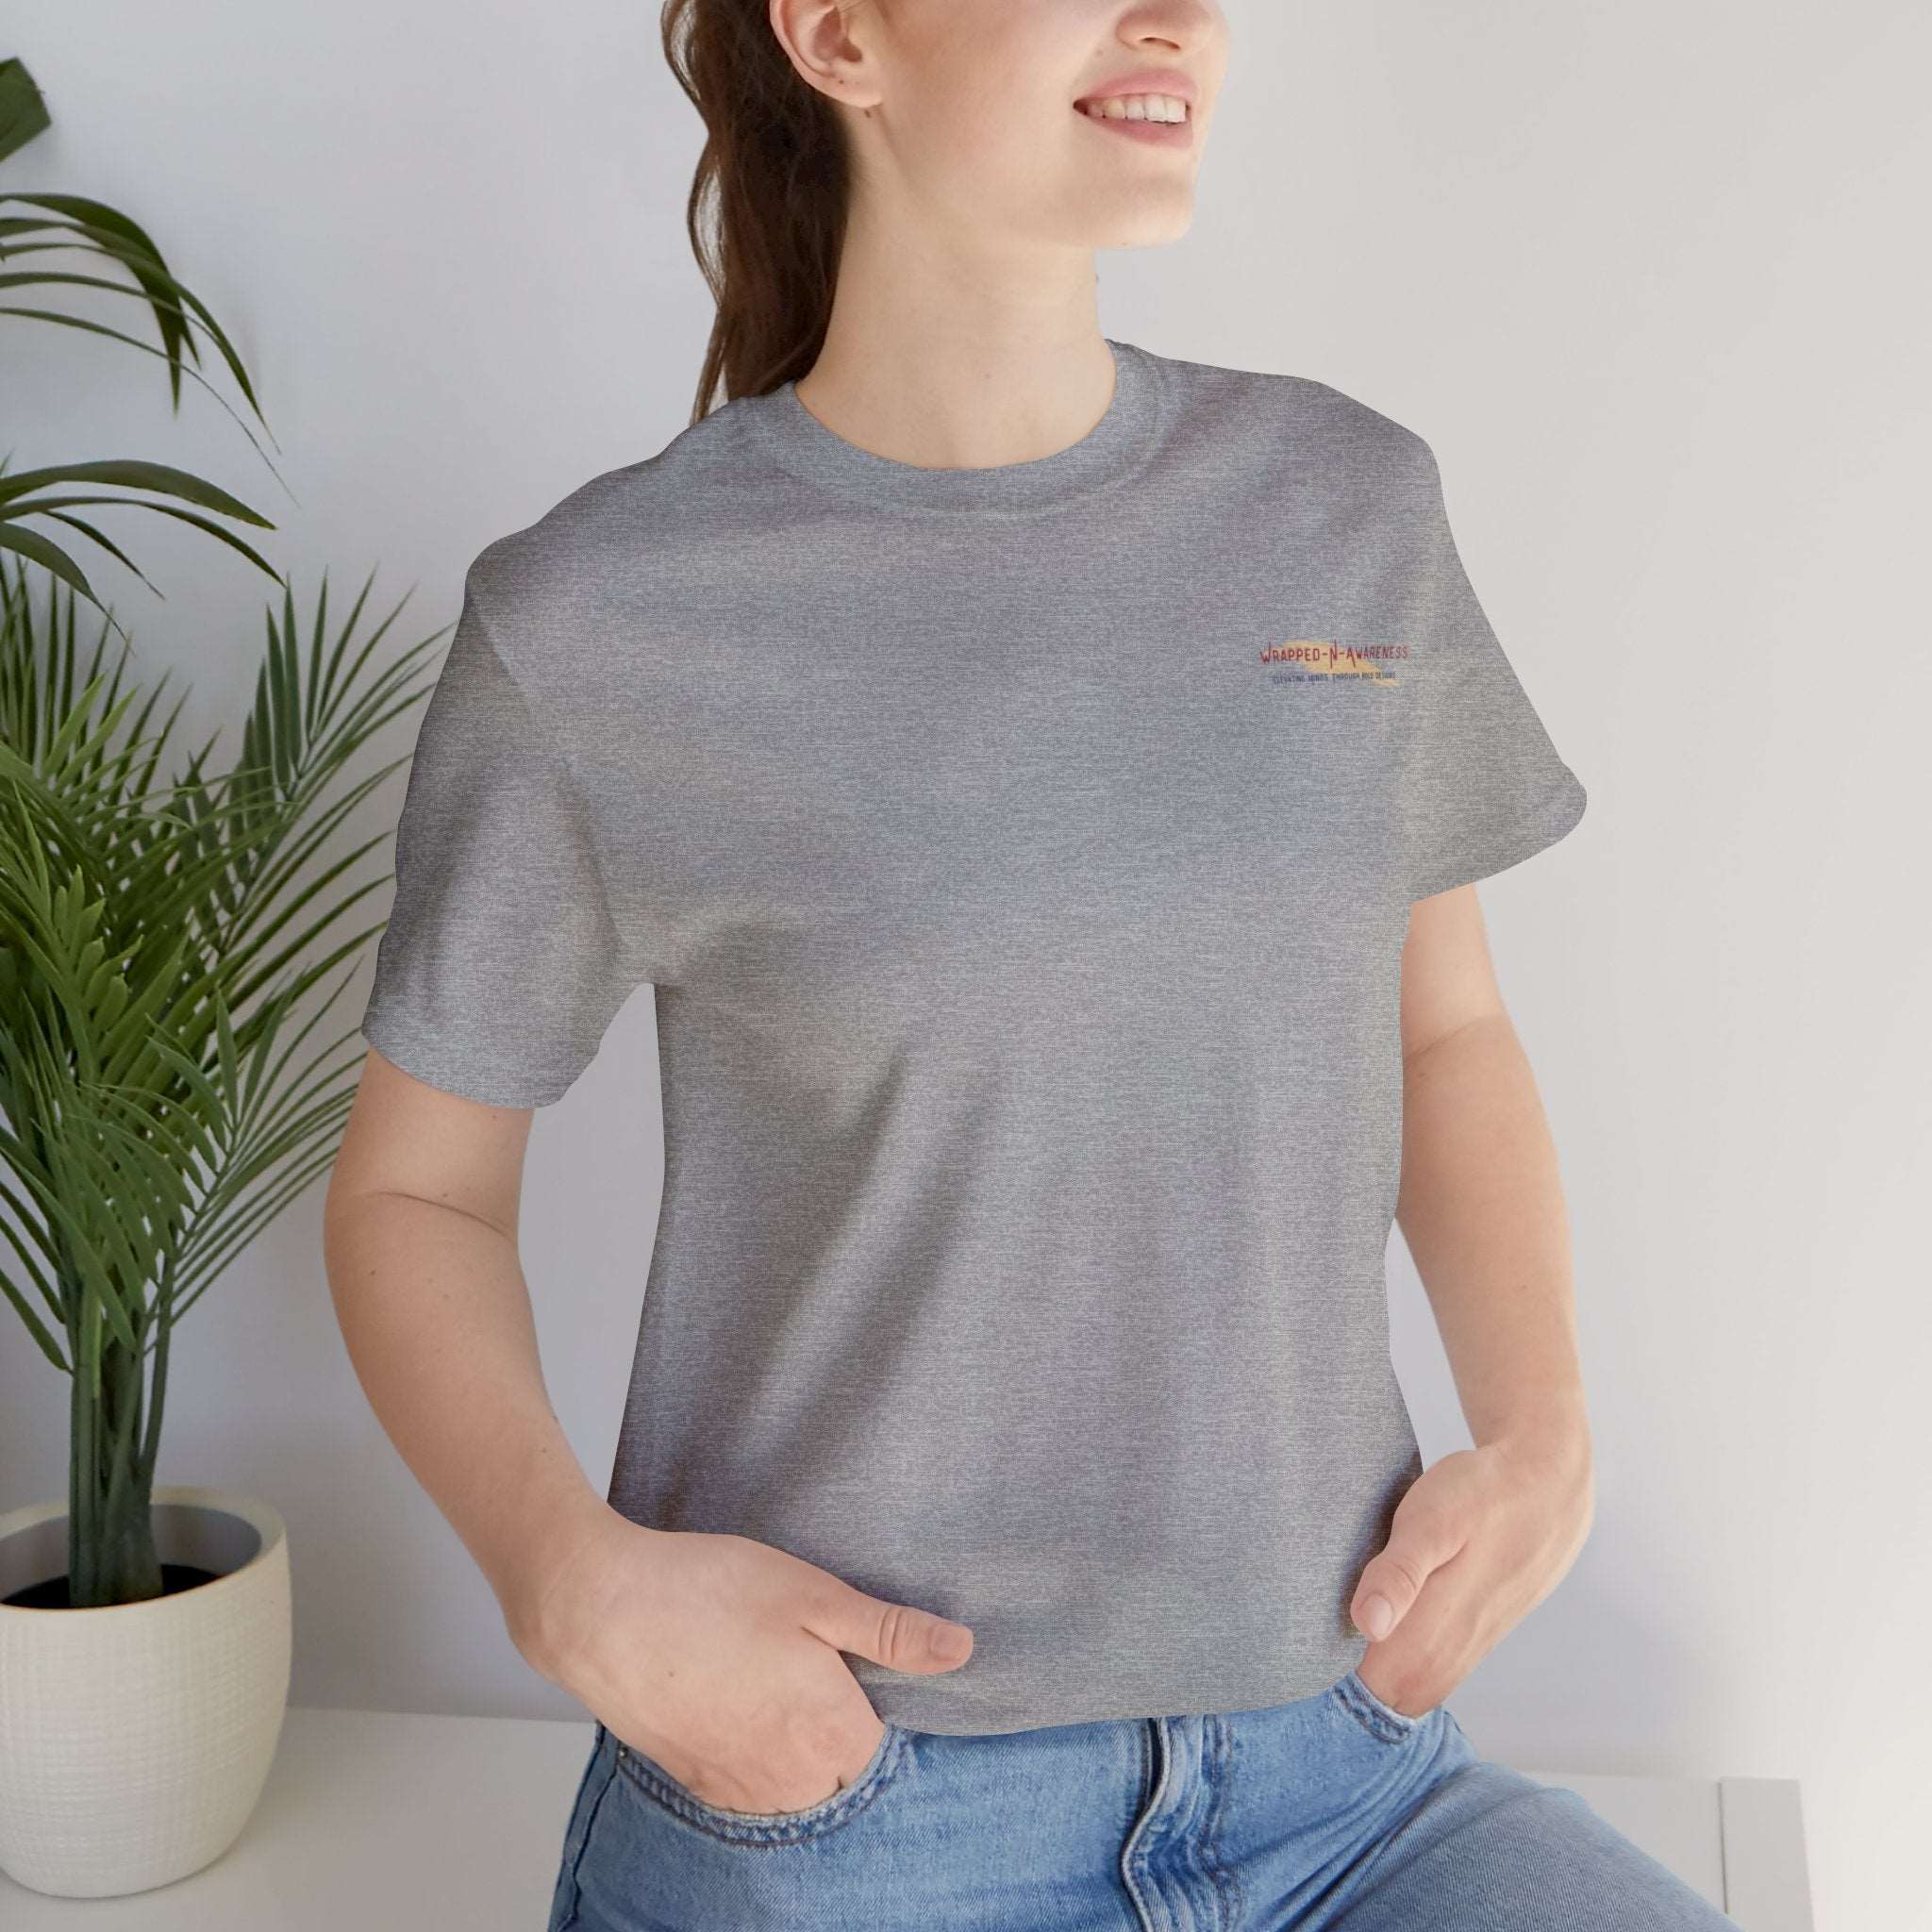 Find Your Balance Jersey Tee - Bella+Canvas 3001 Athletic Heather Airlume Cotton Bella+Canvas 3001 Crew Neckline Jersey Short Sleeve Lightweight Fabric Mental Health Support Retail Fit Tear-away Label Tee Unisex Tee T-Shirt 162264553114829451_2048_16ee0734-a28a-4840-8e91-828daa97d404 Printify